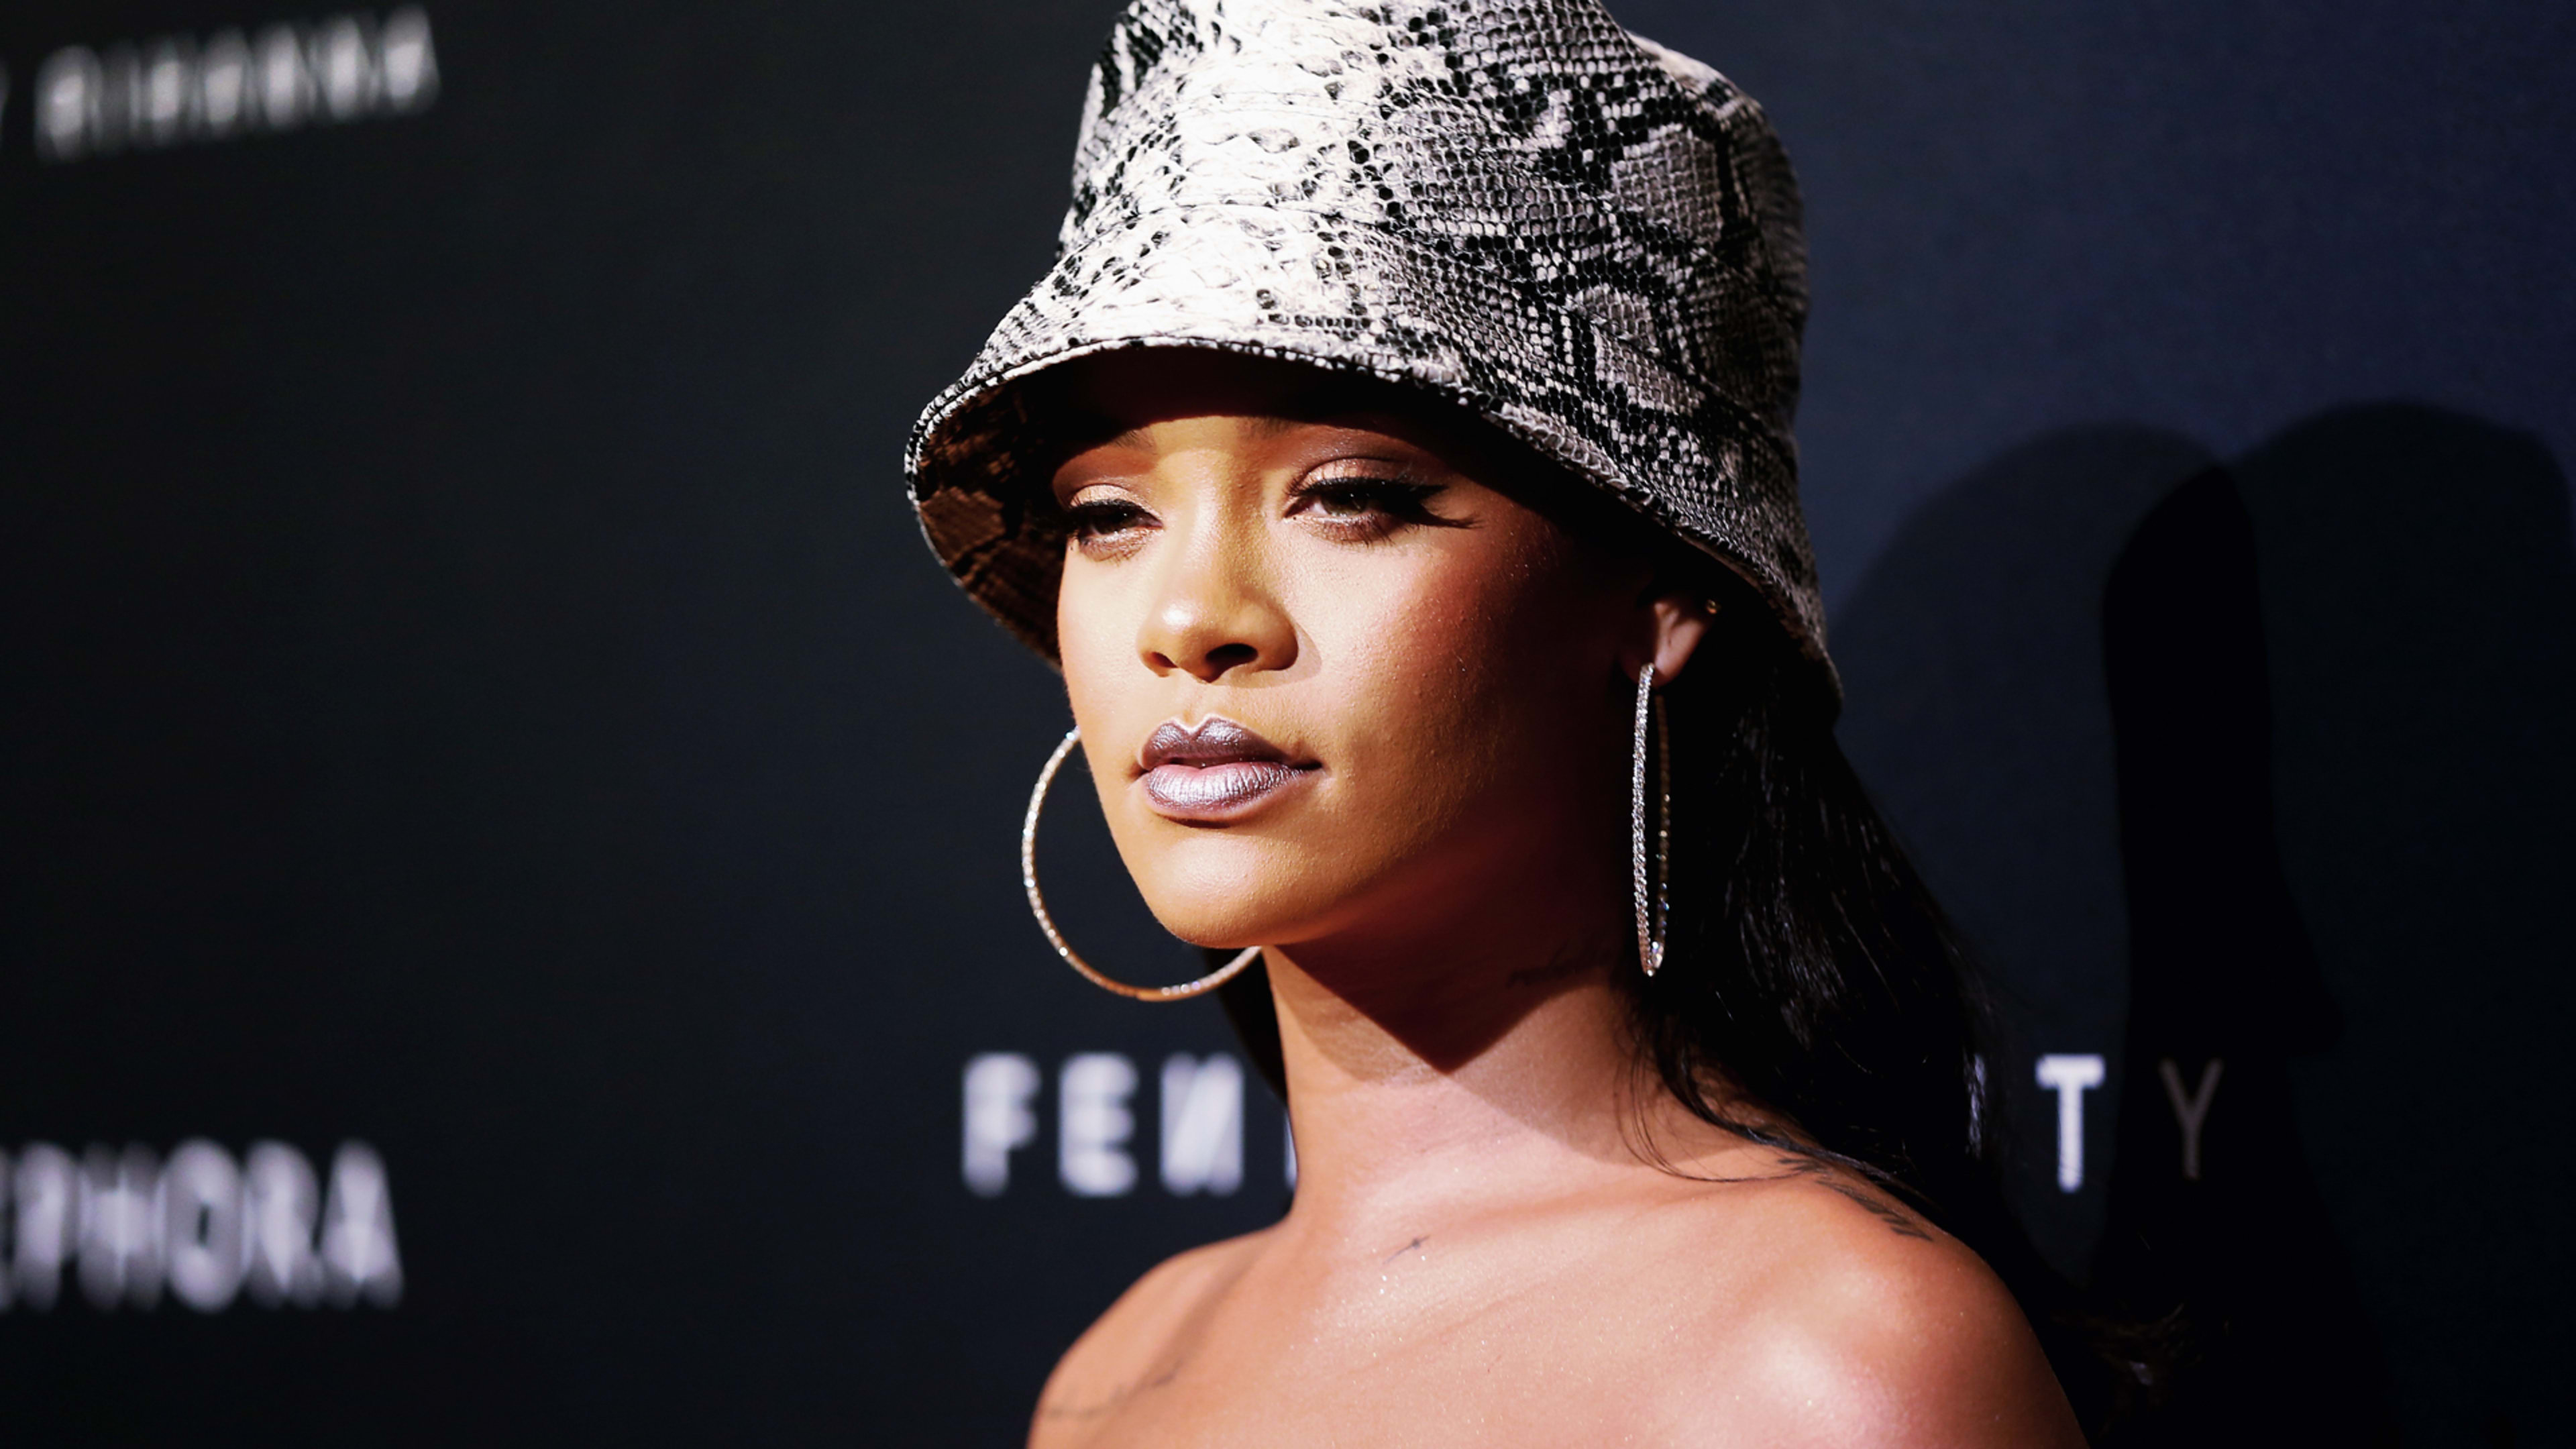 Rihanna is suing her dad over their own last name: Fenty